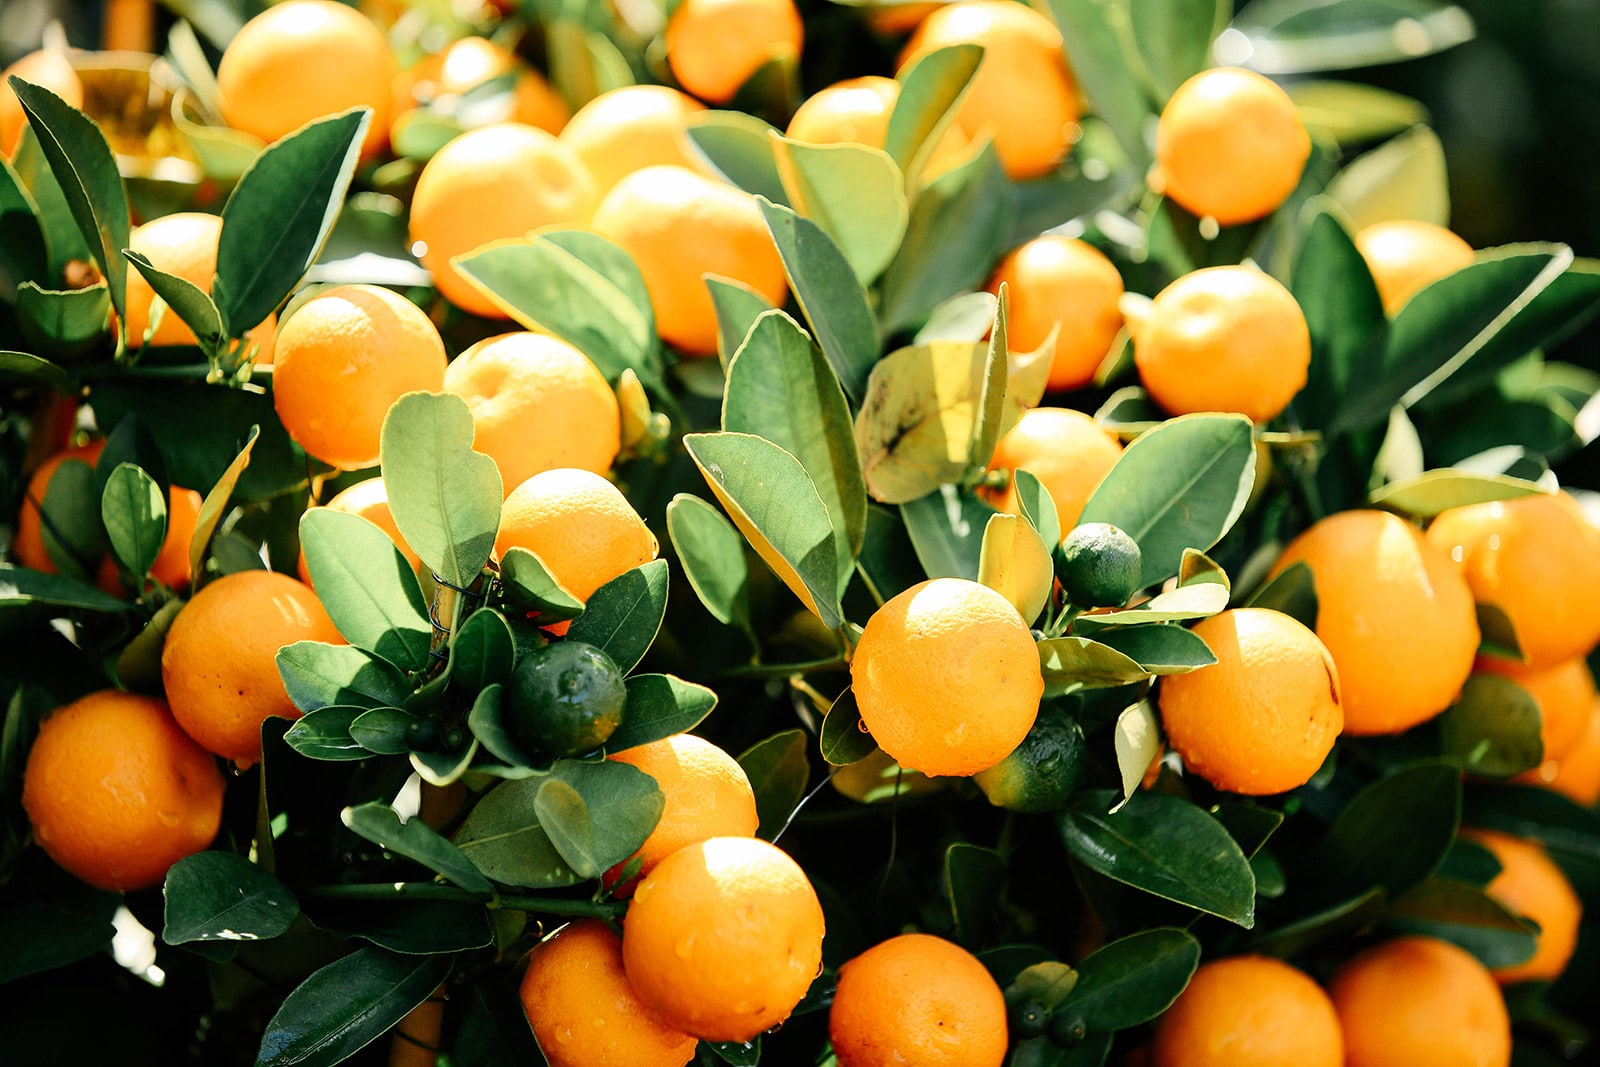 Clementine tree loaded with fruits